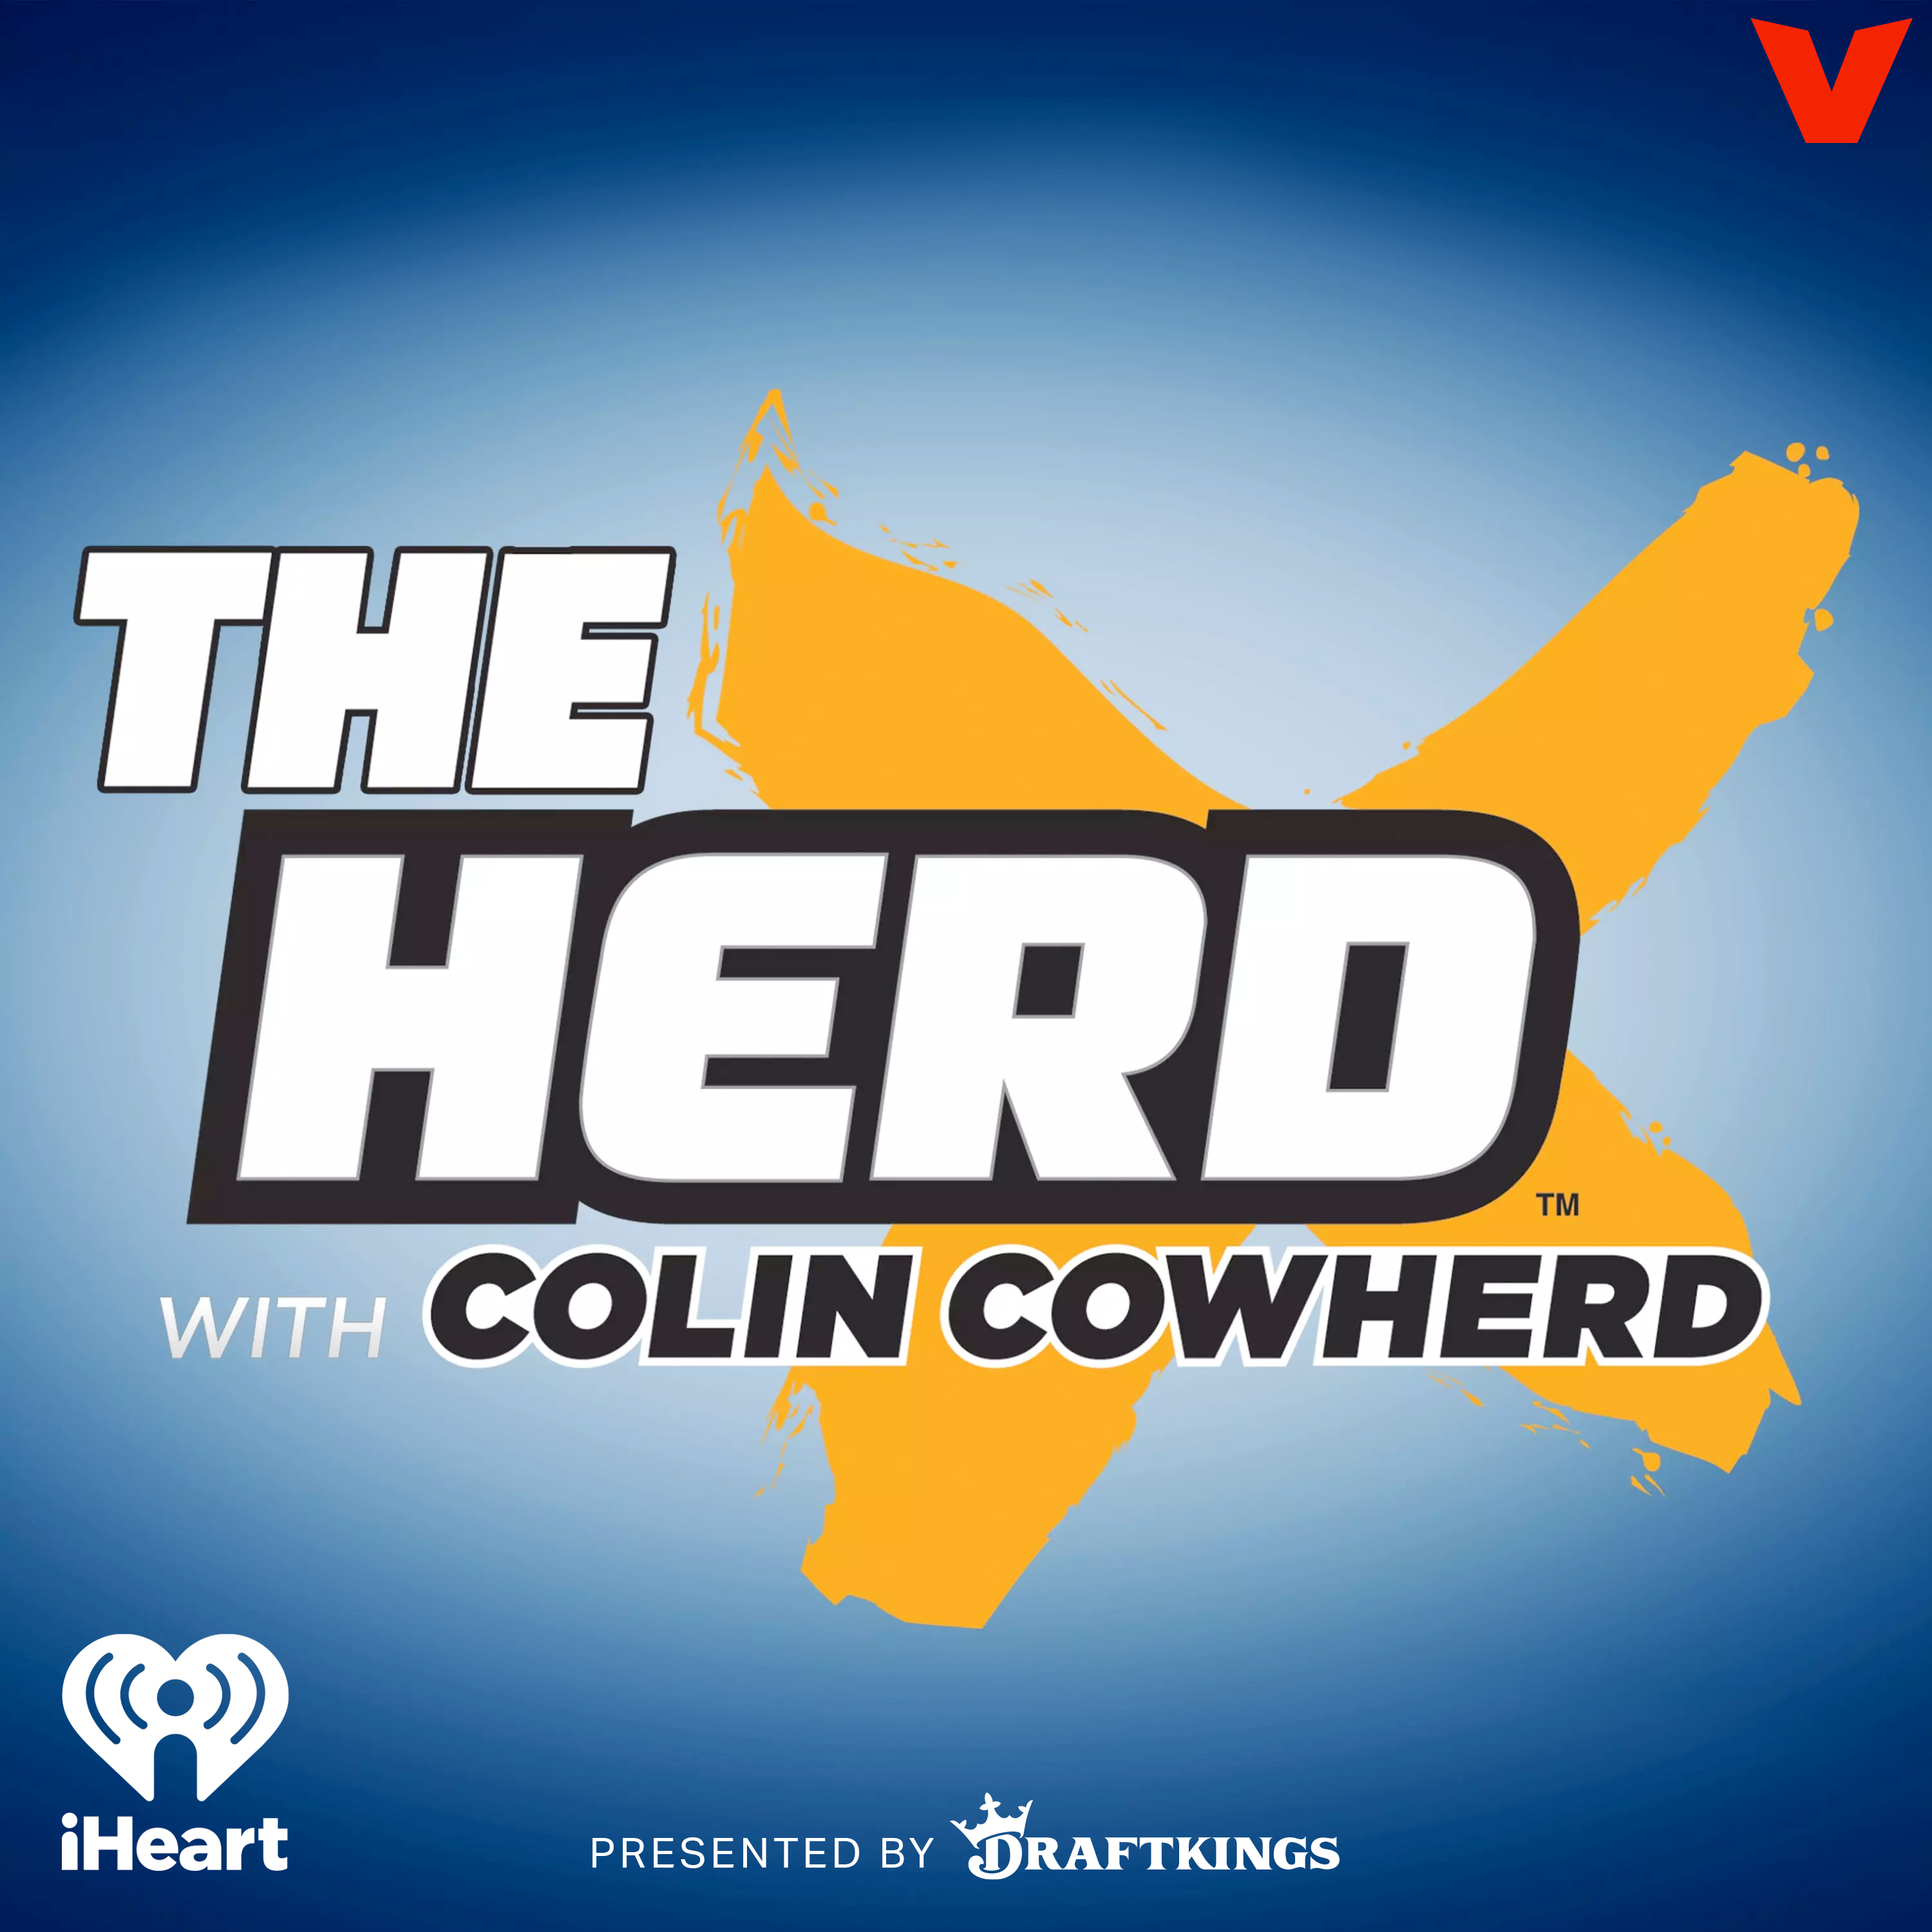 Colin Cowherd Podcast - NFL Week 3 Reaction on Rodgers Heroics, Stafford Statement, Herbert vs. Mahomes with Tyler Dunne